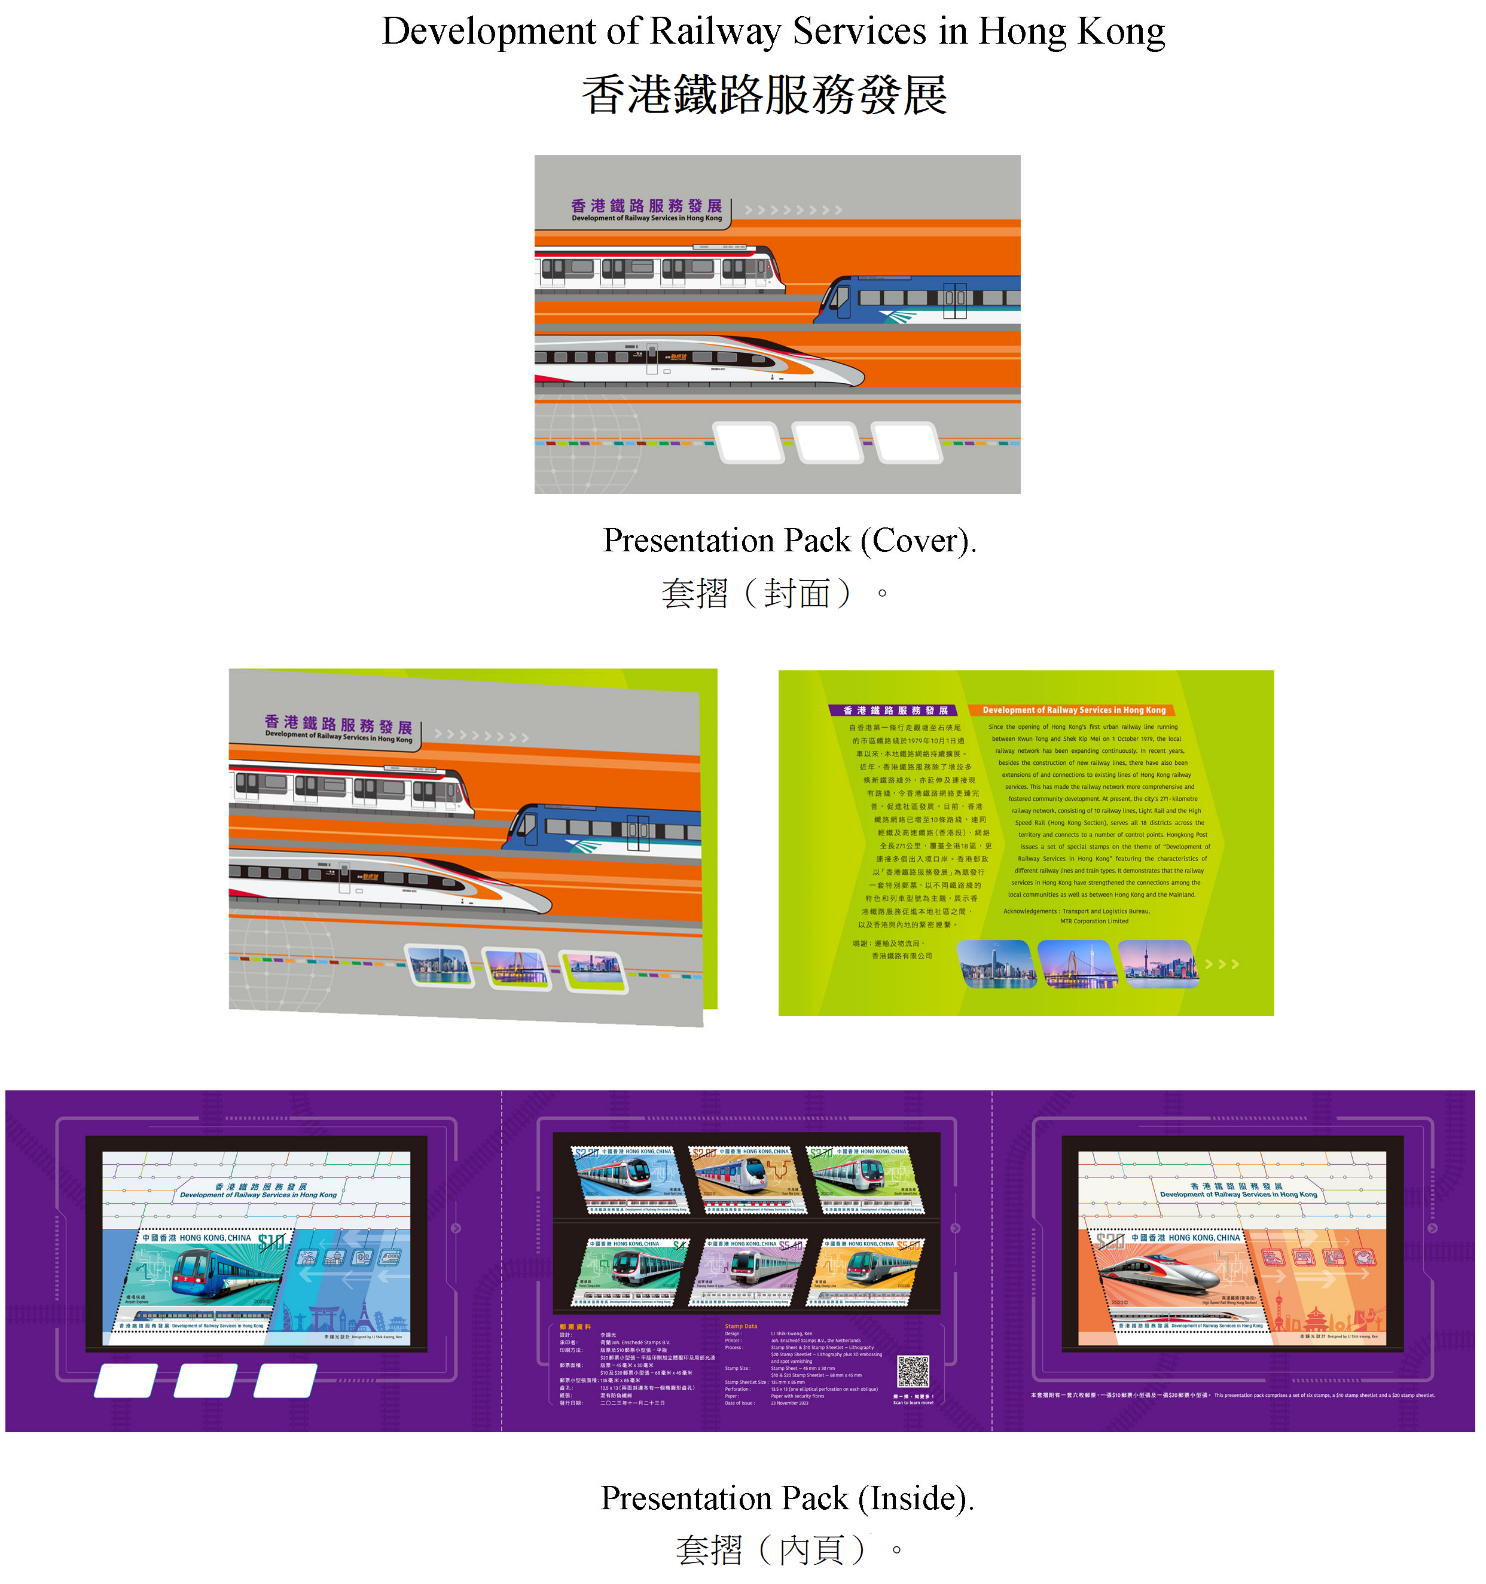 Hongkong Post will launch a special stamp issue and associated philatelic products on the theme of "Development of Railway Services in Hong Kong" on November 23 (Thursday). Photos show the presentation pack.
